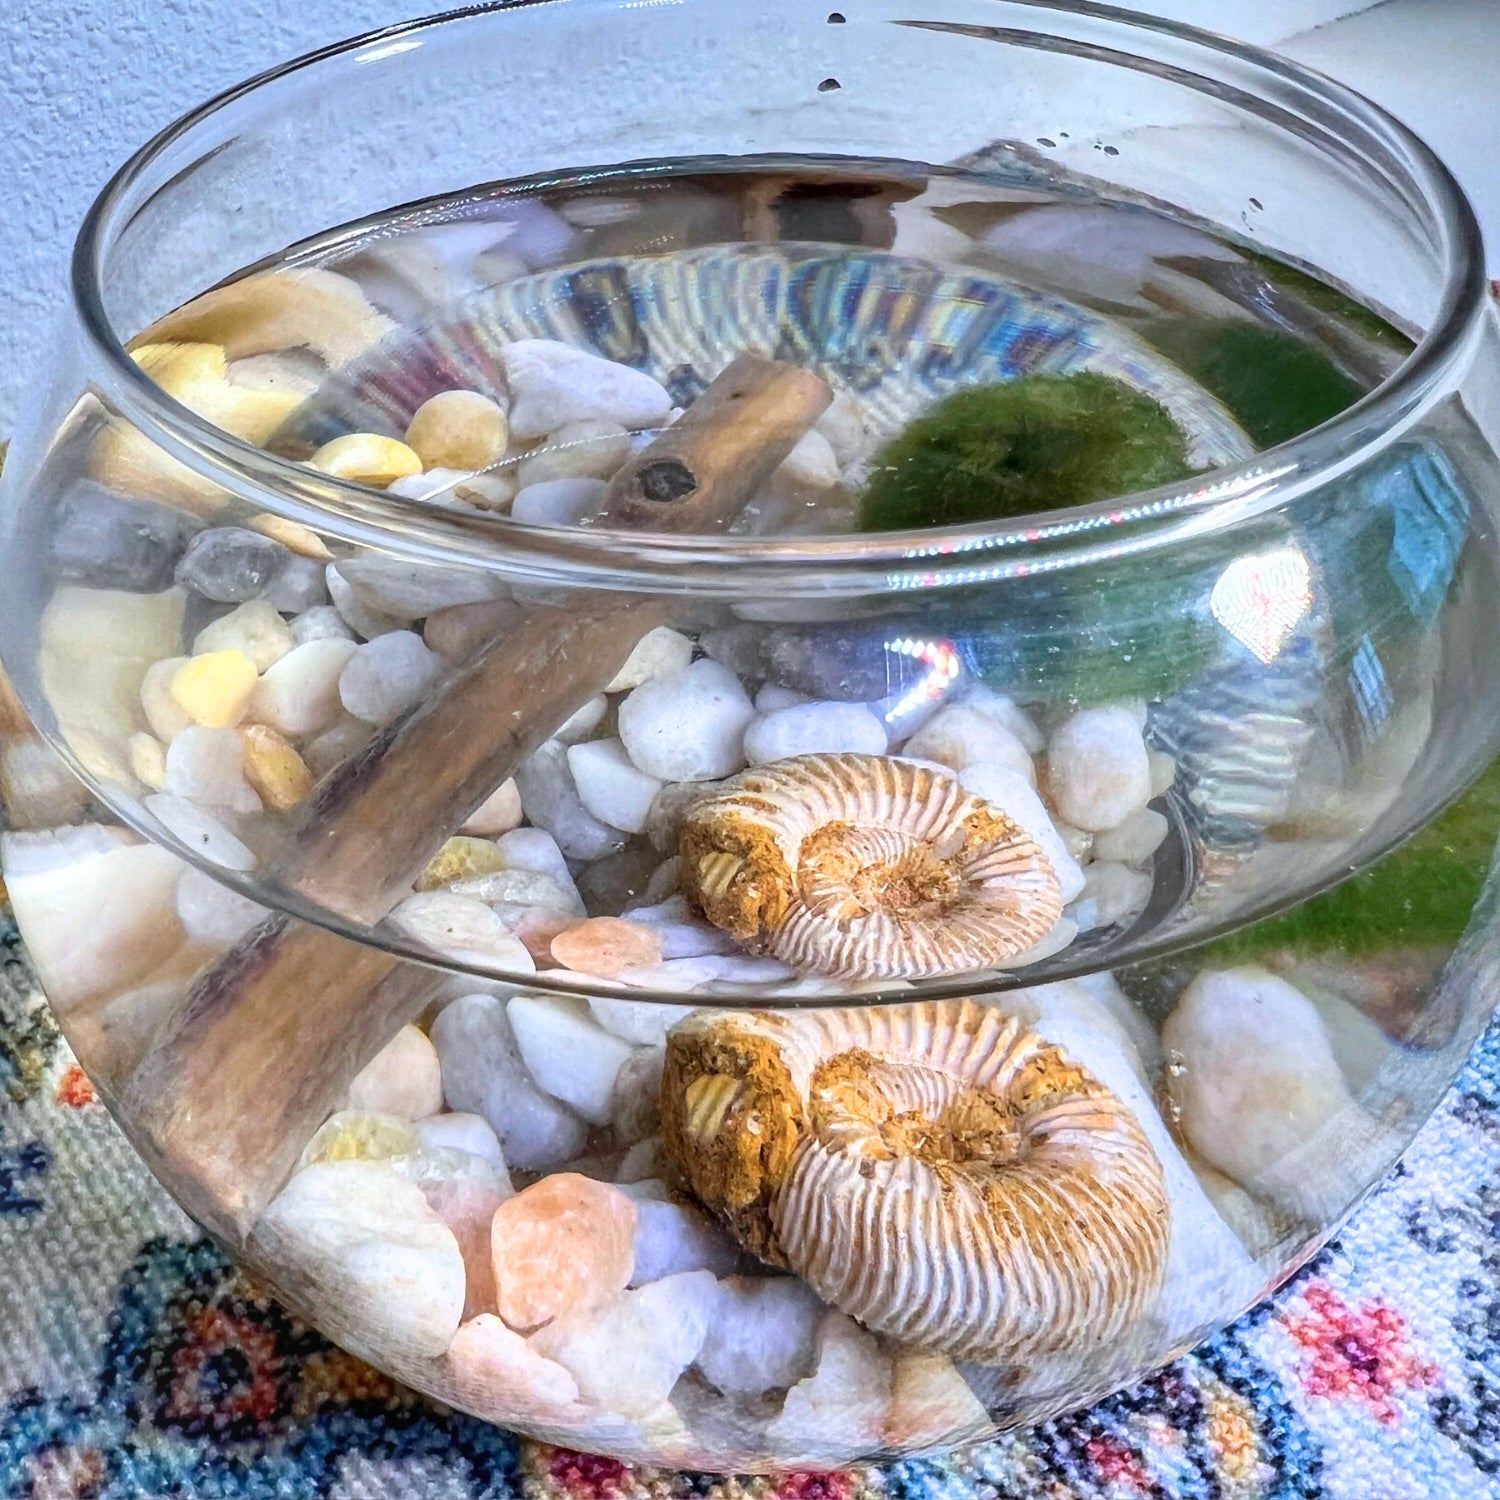 Top-down perspective of a glass aquarium containing a Marimo Moss Ball, spiral shell fossils, a piece of driftwood, and multicolored pebbles on a patterned textile surface.